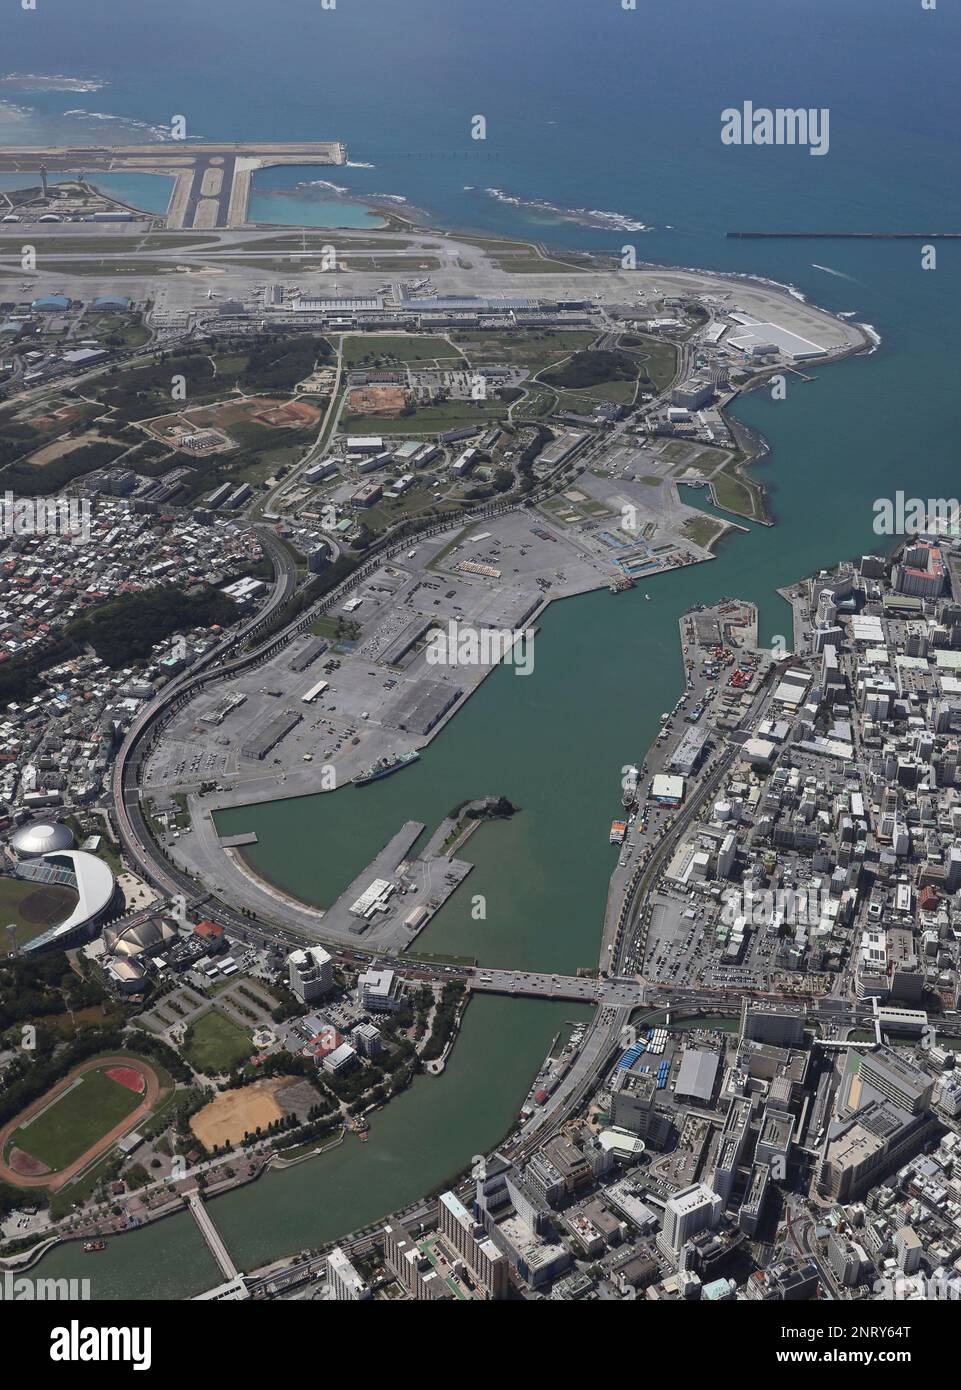 An aerial photo shows United States Forces Japan Naha Port Facility, also called army port or Naha Military port, in Naha, Okinawa prefecture on Sep. 24, 2019.( The Yomiuri Shimbun via AP Images ) Stock Photo